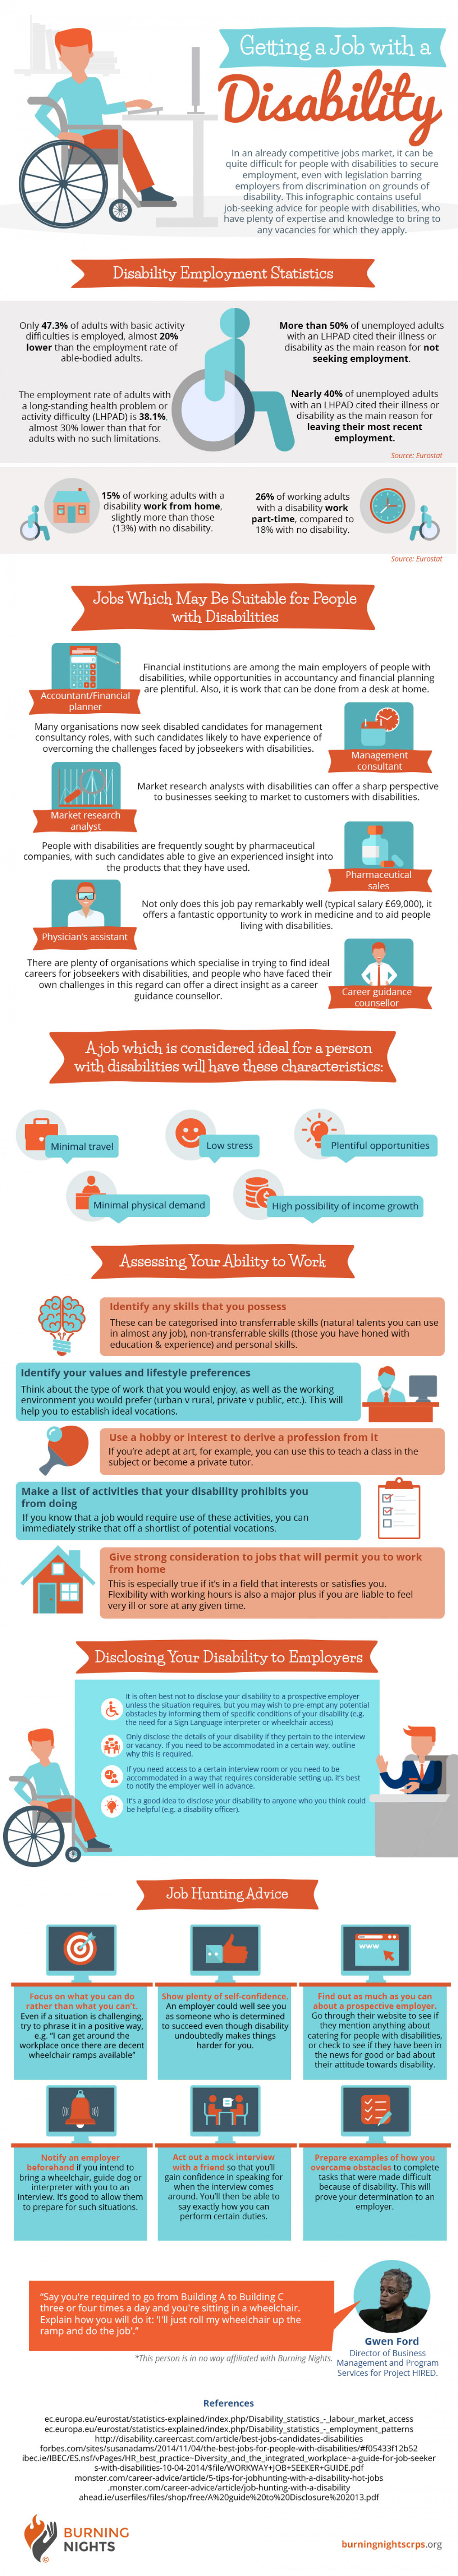 [Infographic] How To Get A Job With A Disability